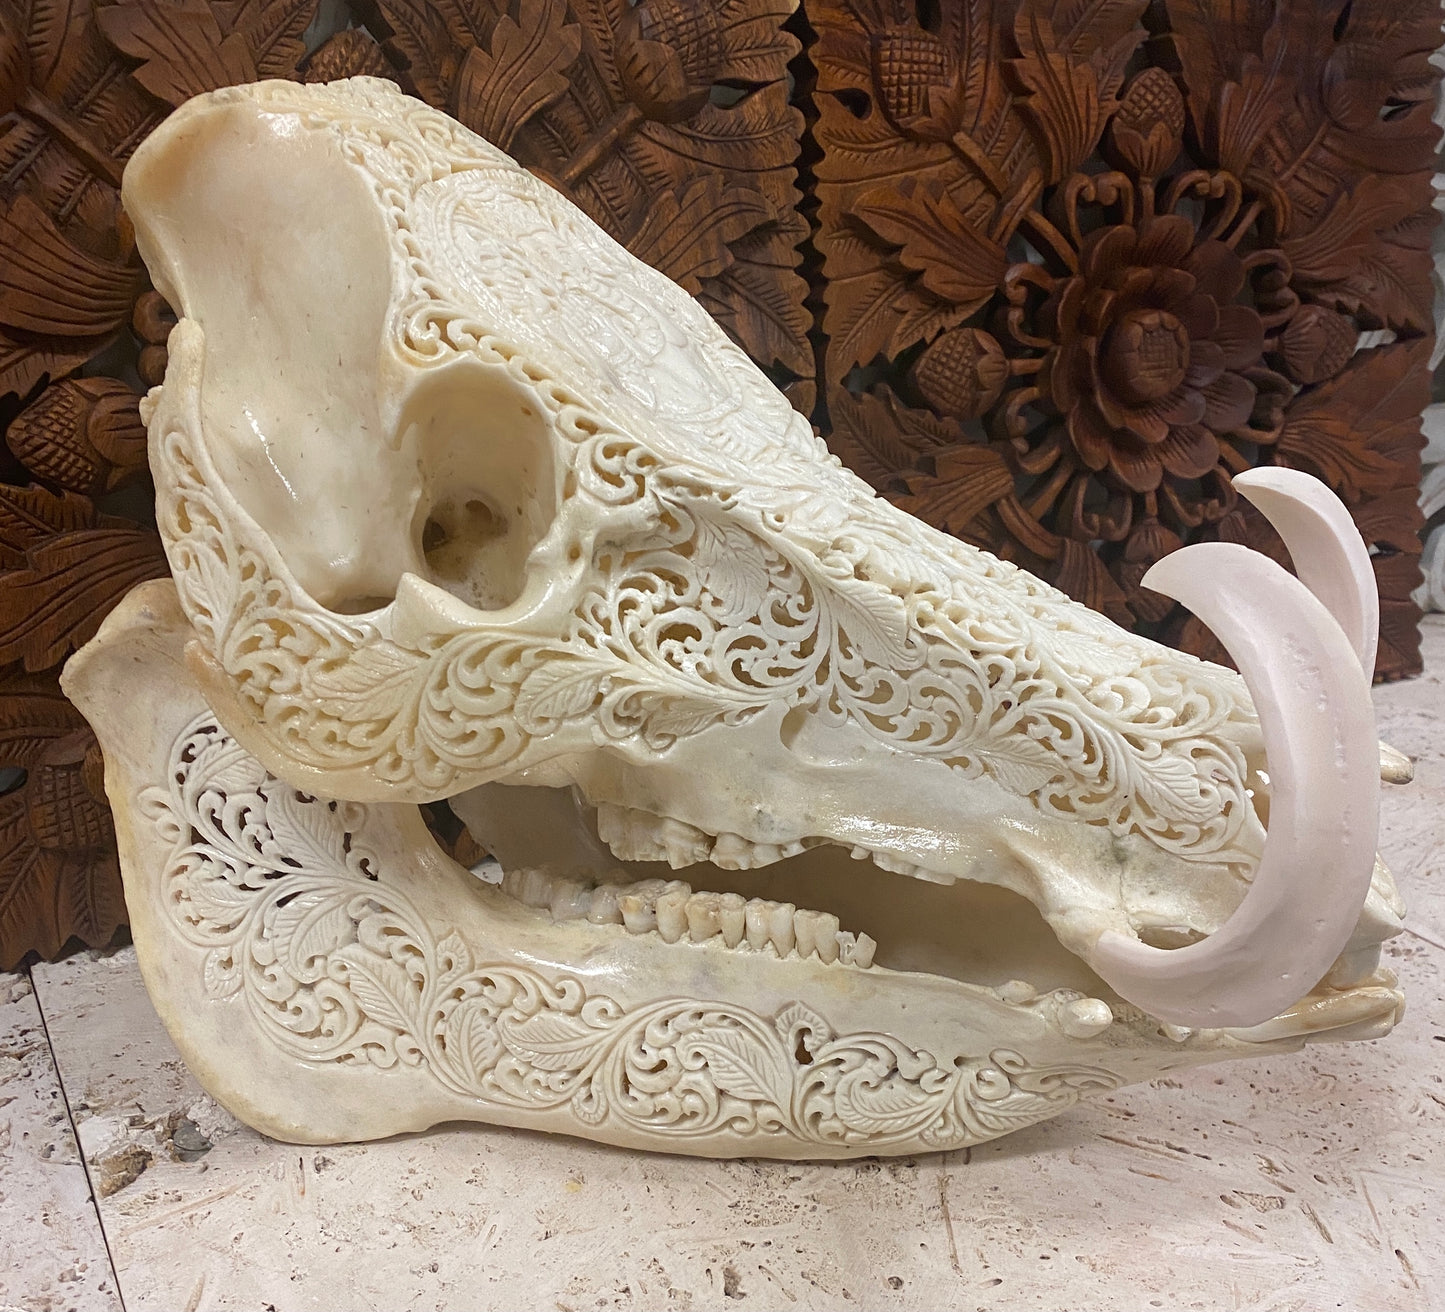 Intricately Hand Carved Wild Boar Skulls with Ganesh